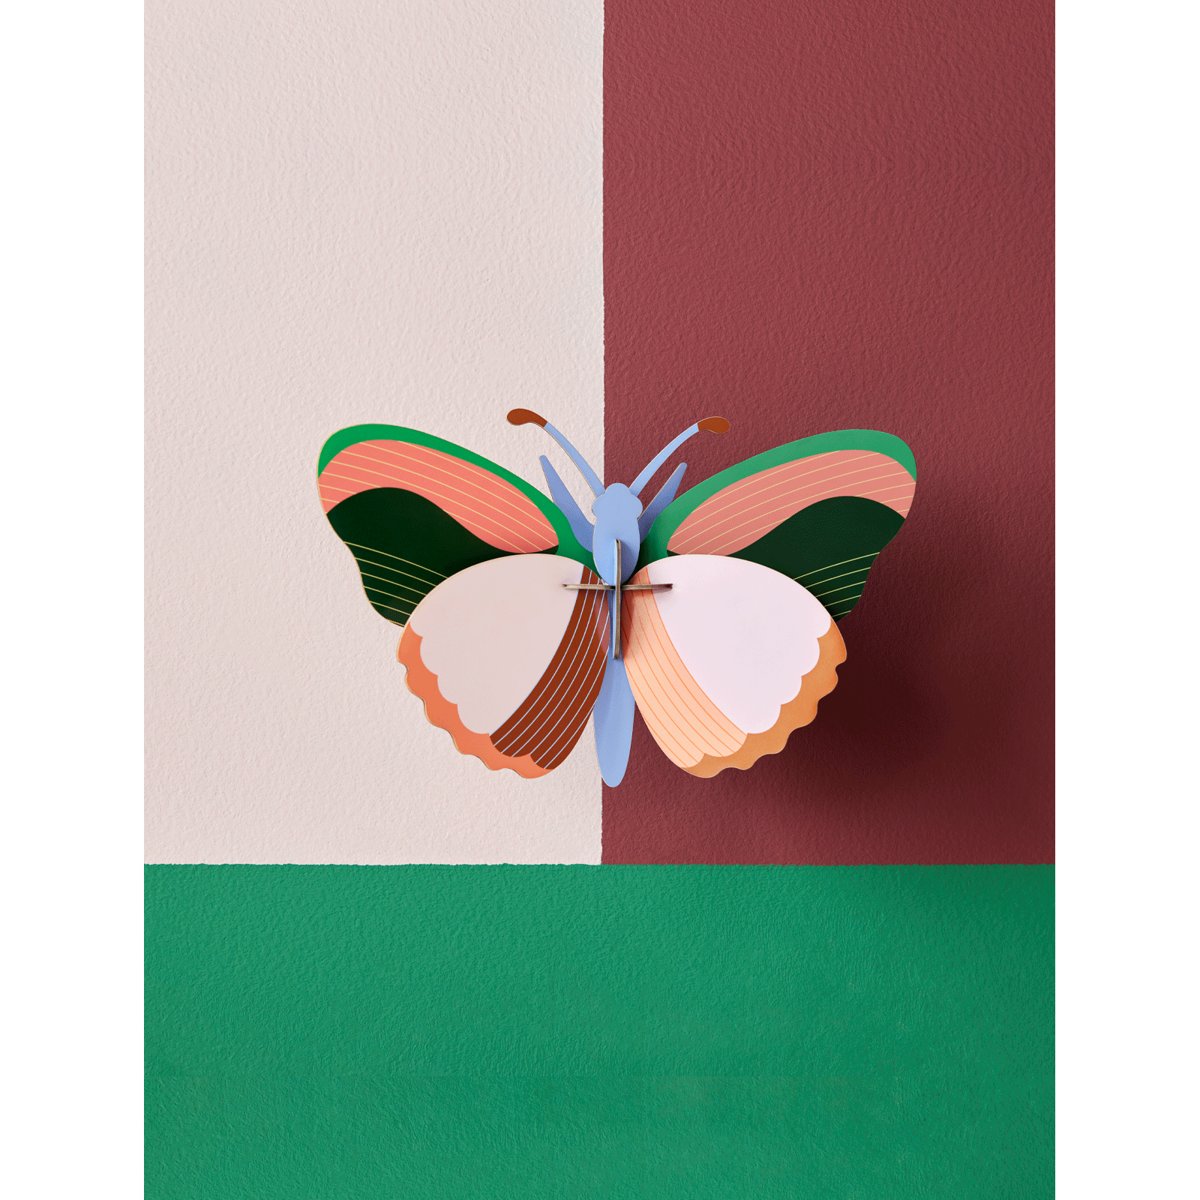 mondocherry - Studio Roof | sycamore butterfly wall decor - wall